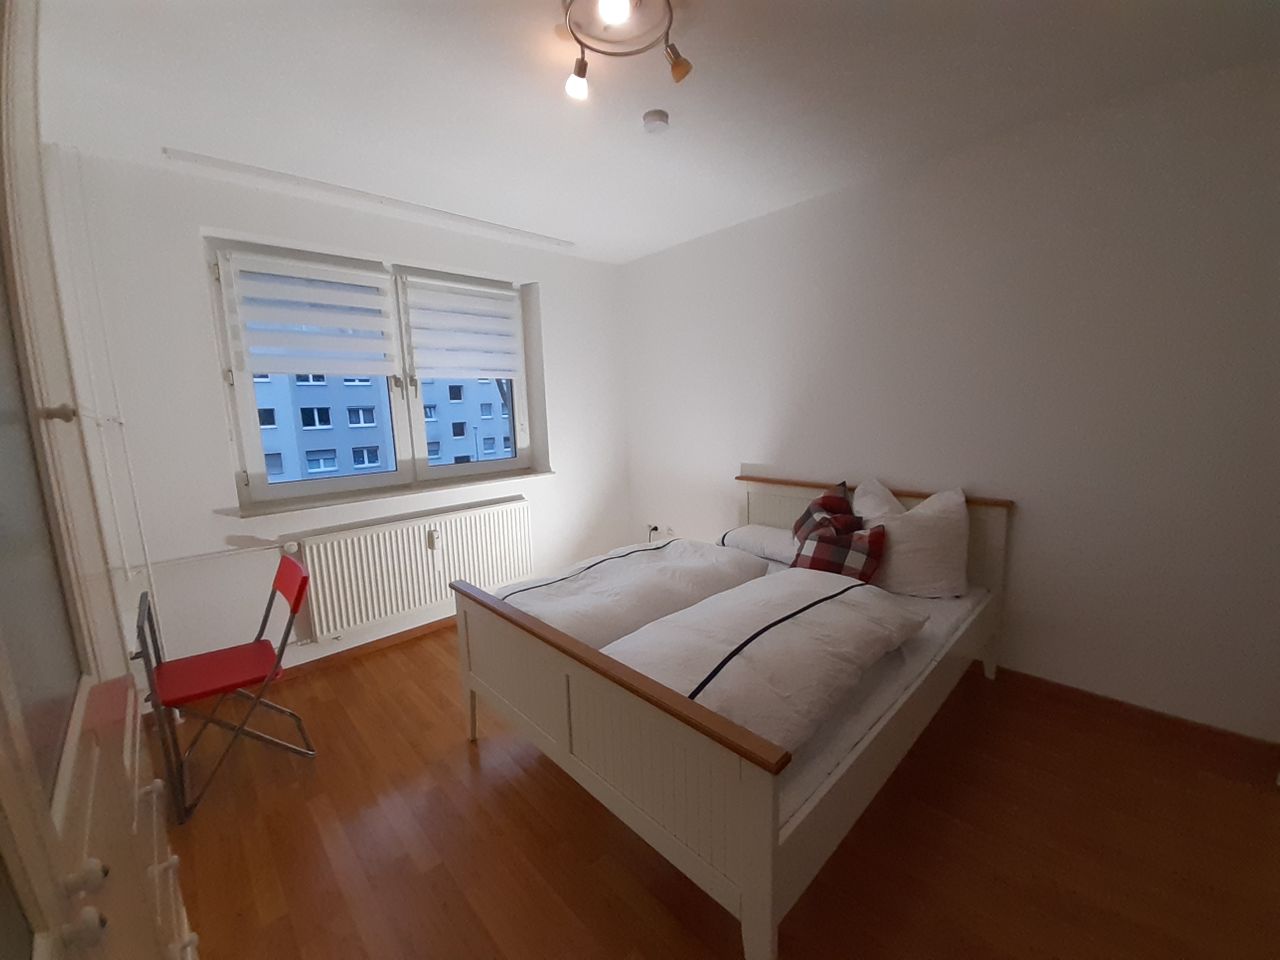 D - E - F - KR Frankfurt Niederrad Perfect shaped appartment including everything that you need, 3 rooms and balcony